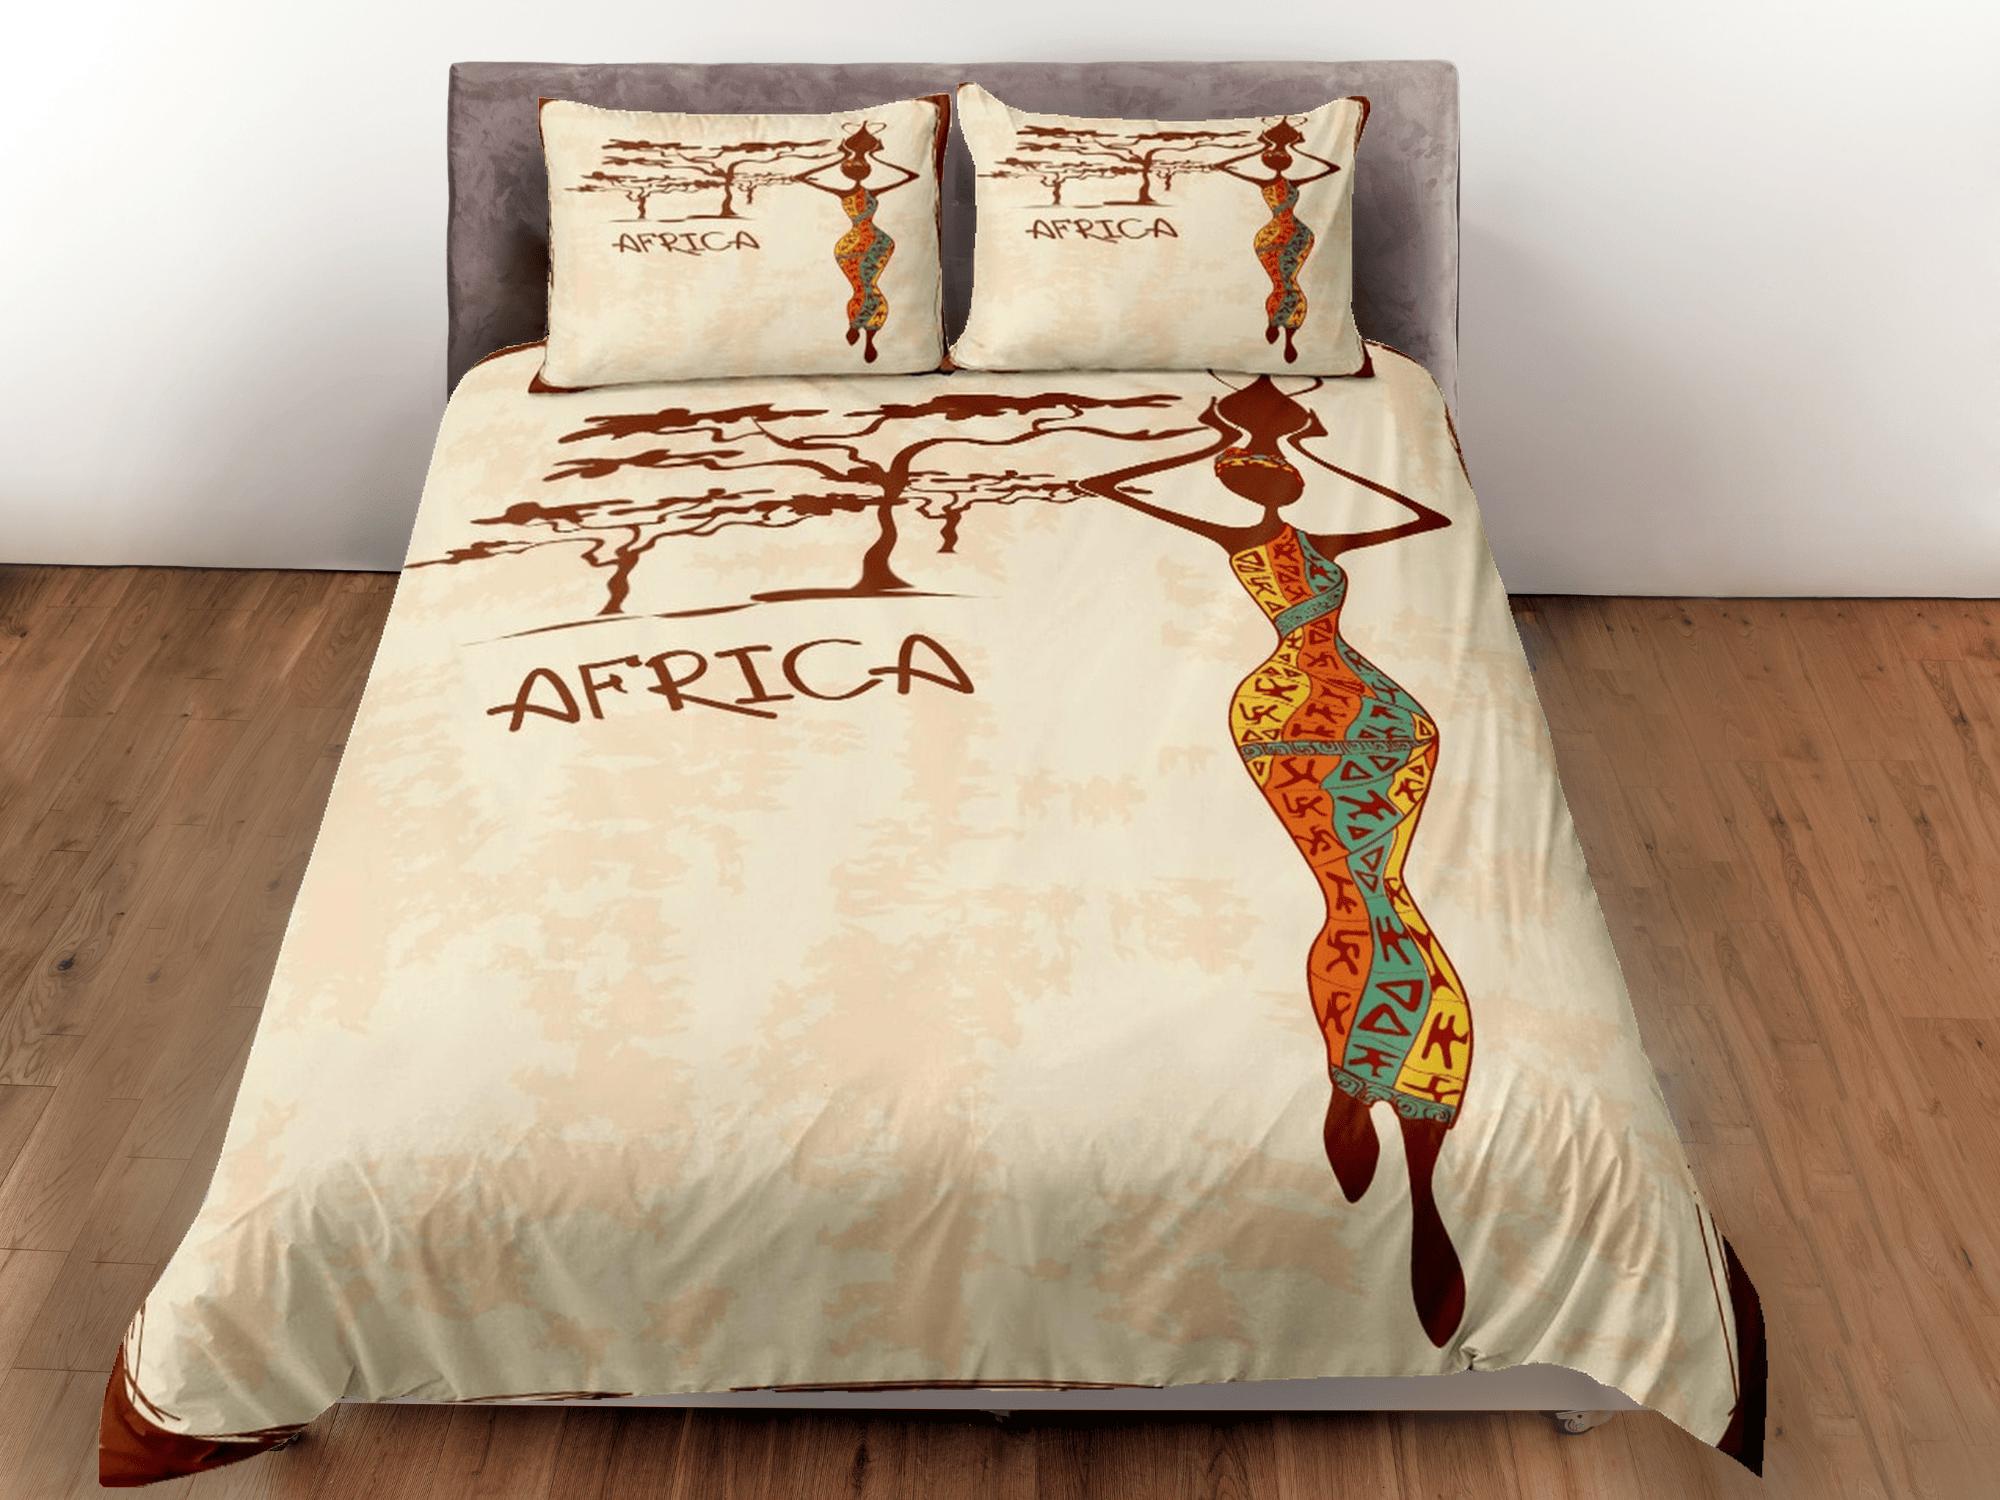 daintyduvet African black woman in traditional dress bedding duvet cover, boho bedding set african ethnic design, afrocentric bedding south african gift